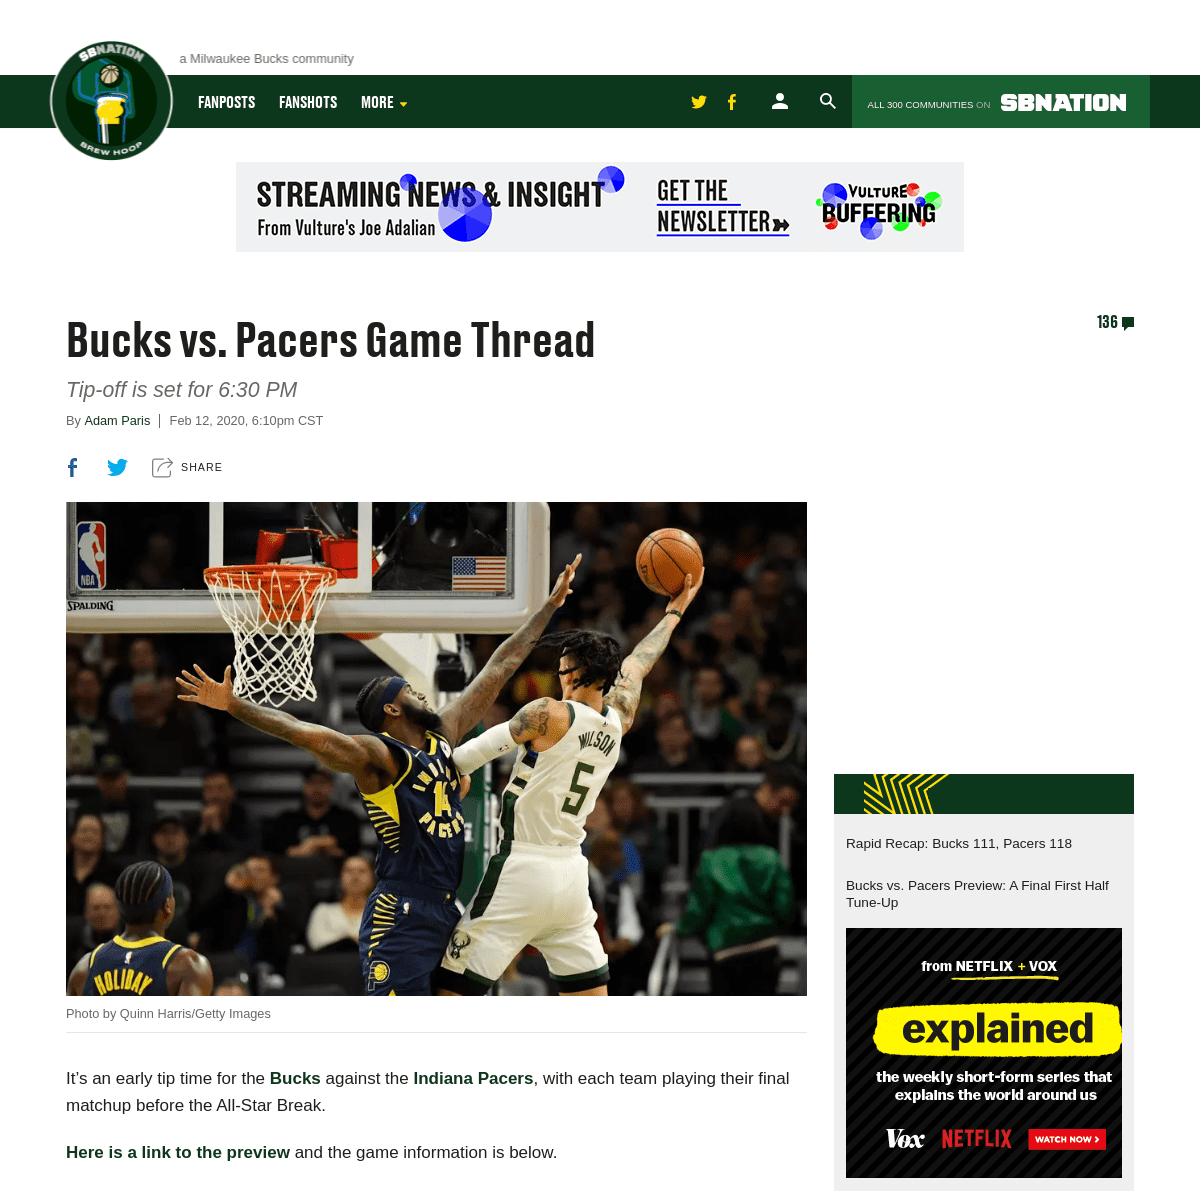 A complete backup of www.brewhoop.com/2020/2/12/21134484/bucks-vs-pacers-game-thread